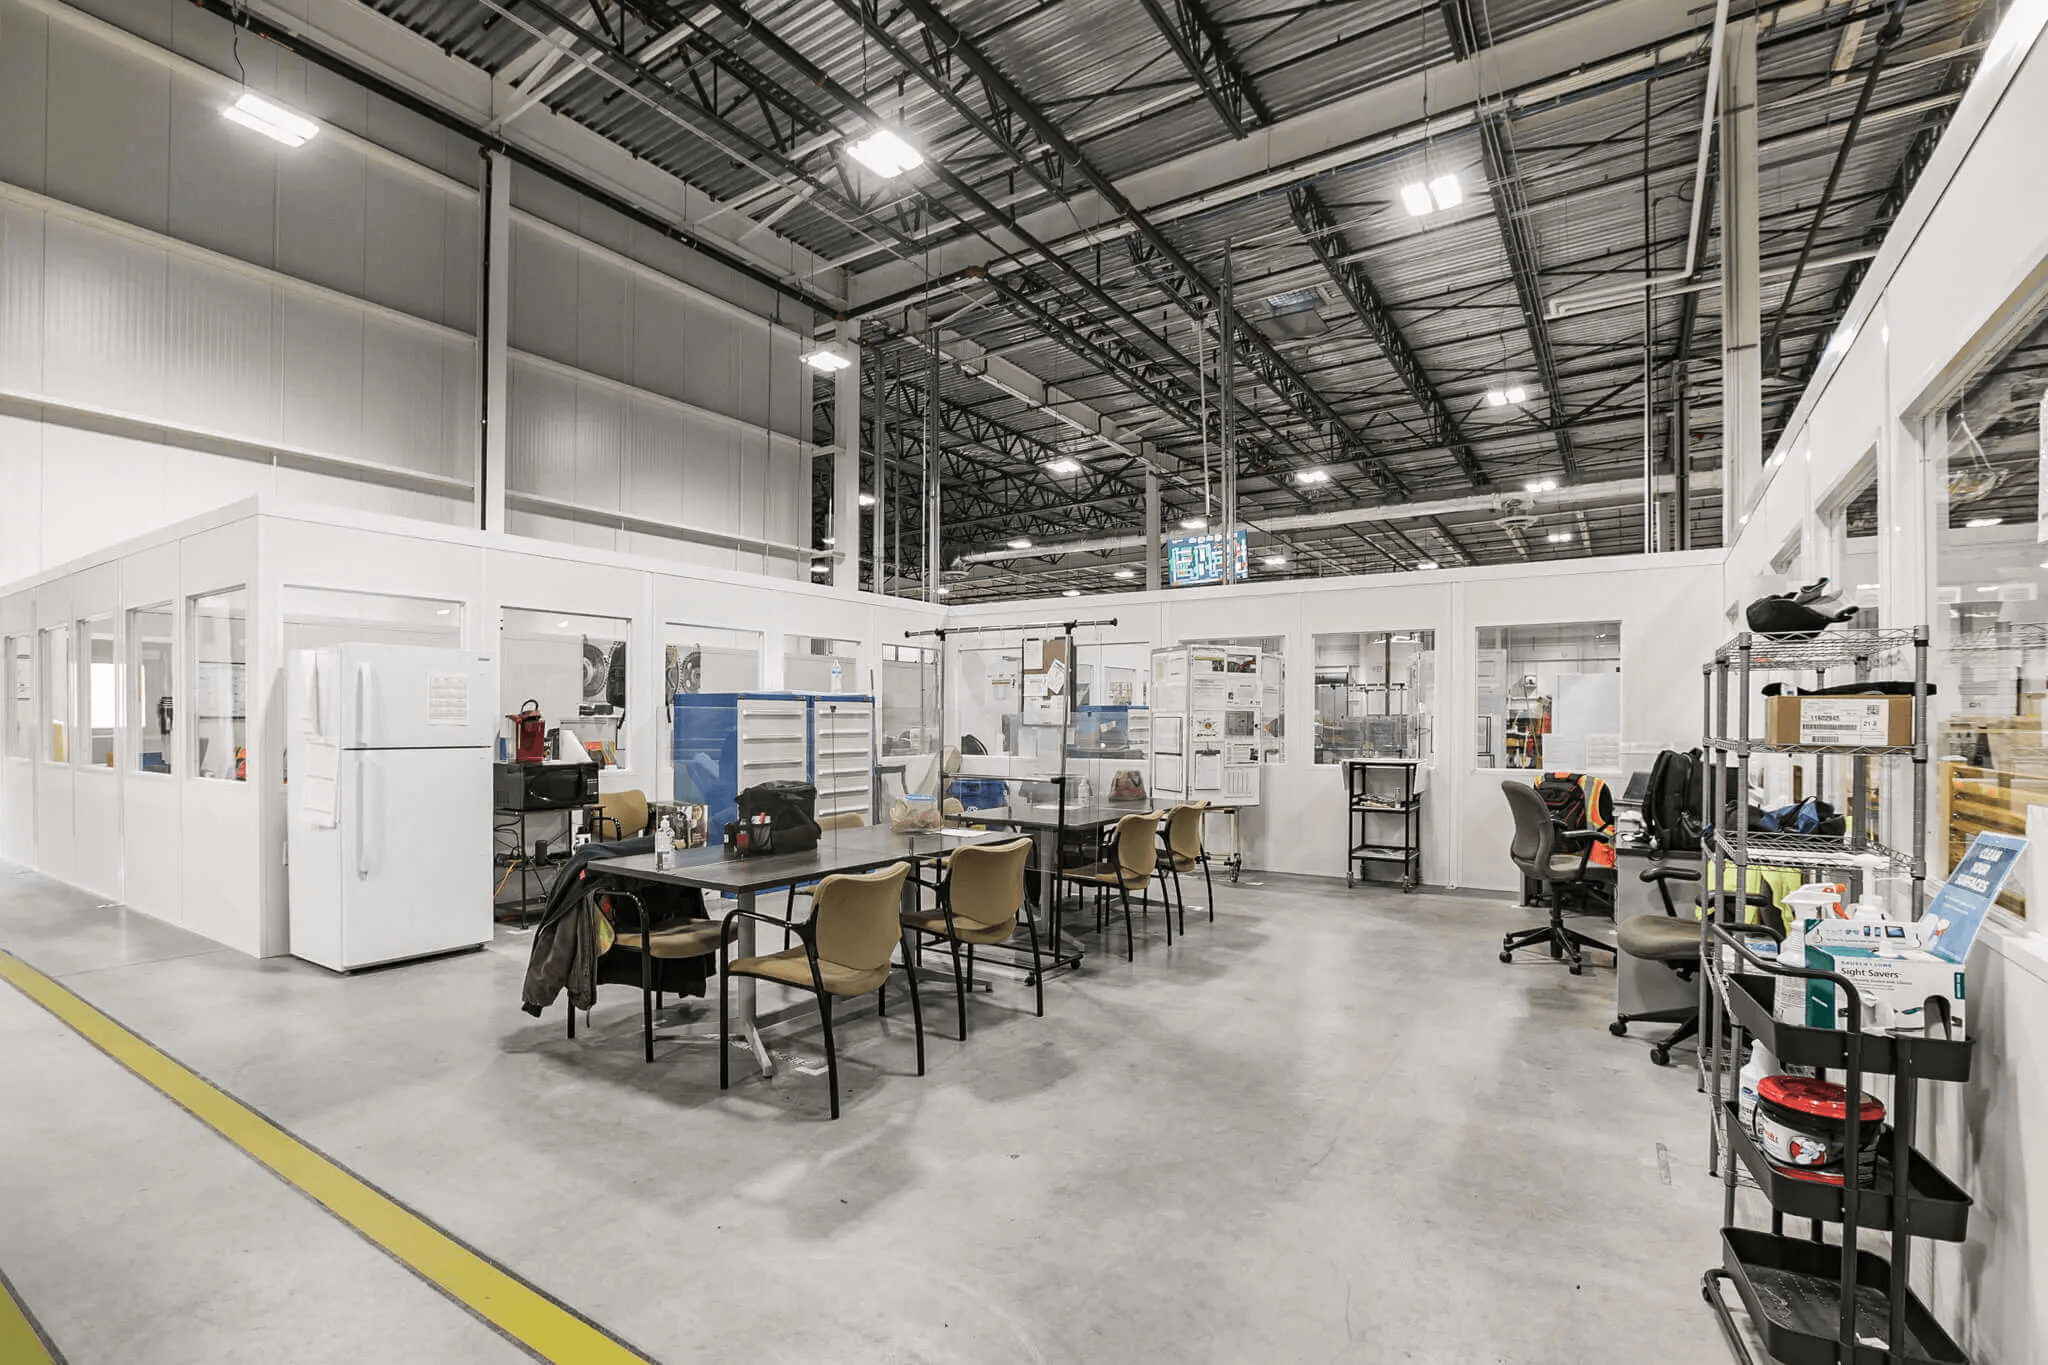 Offices in manufacturing plant